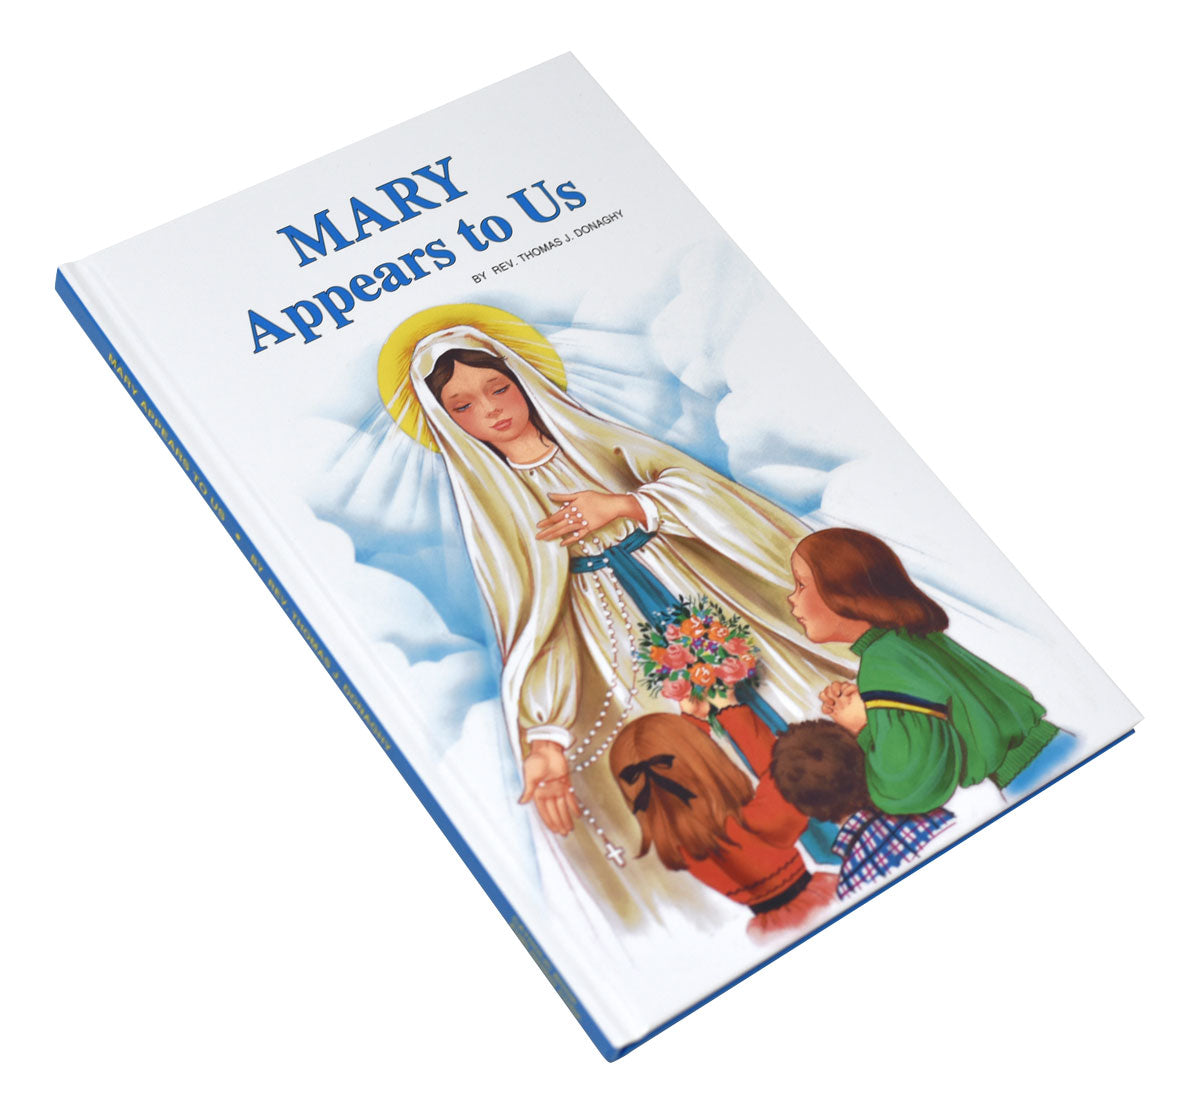 Mary Appears To Us